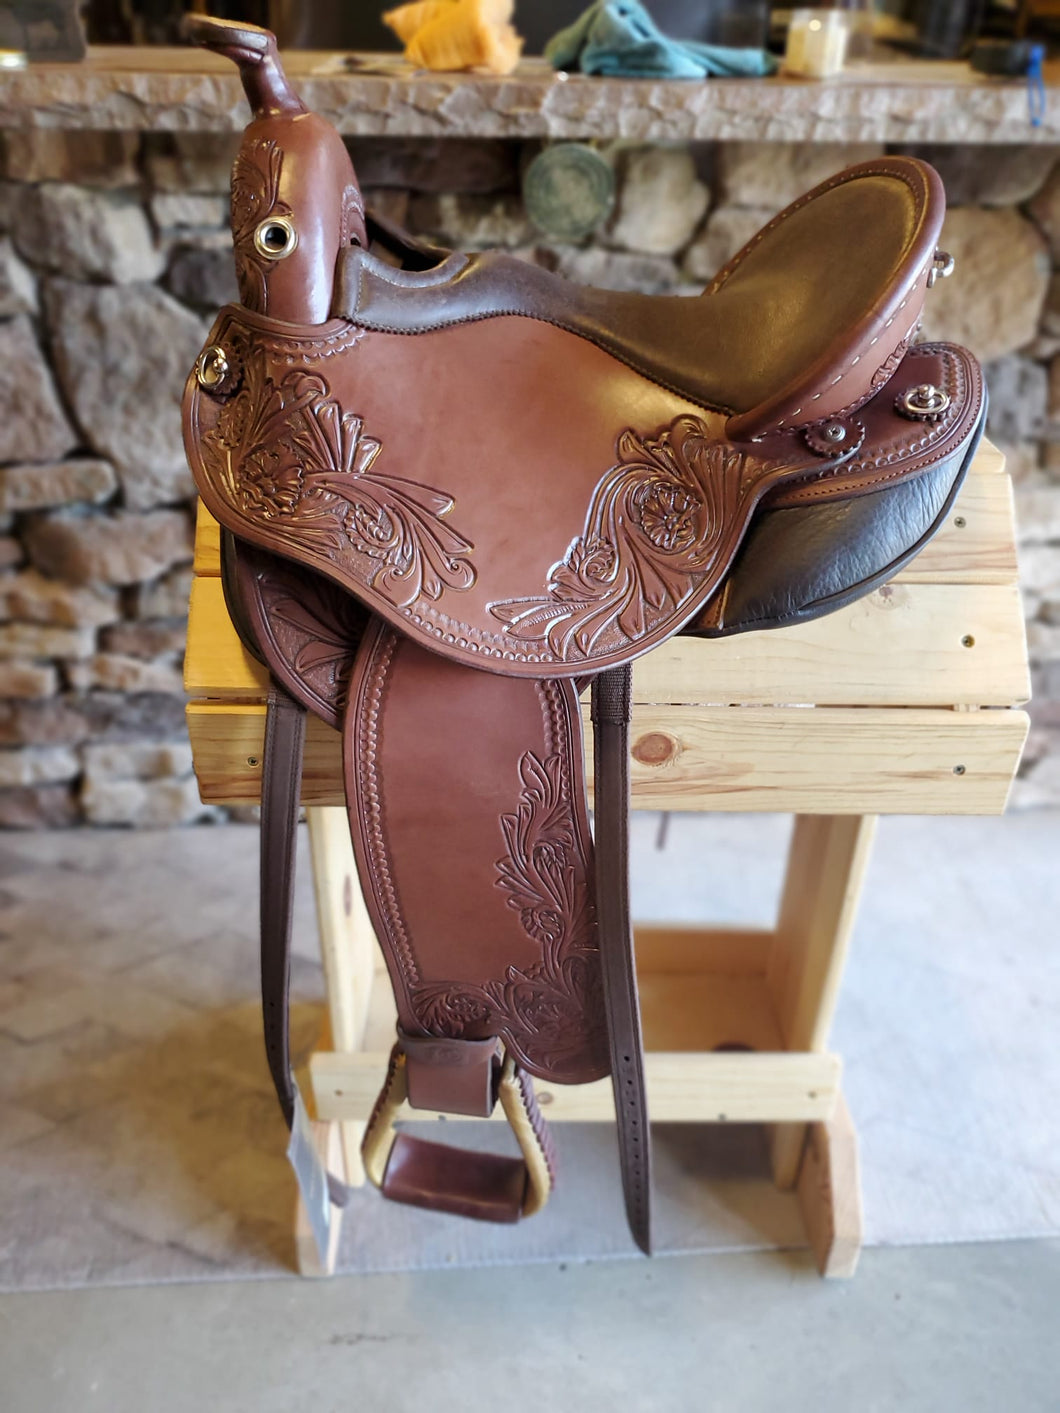 dp saddlery quantum short and light western with a western dressage seat 5504, side view on a wooden saddle rack